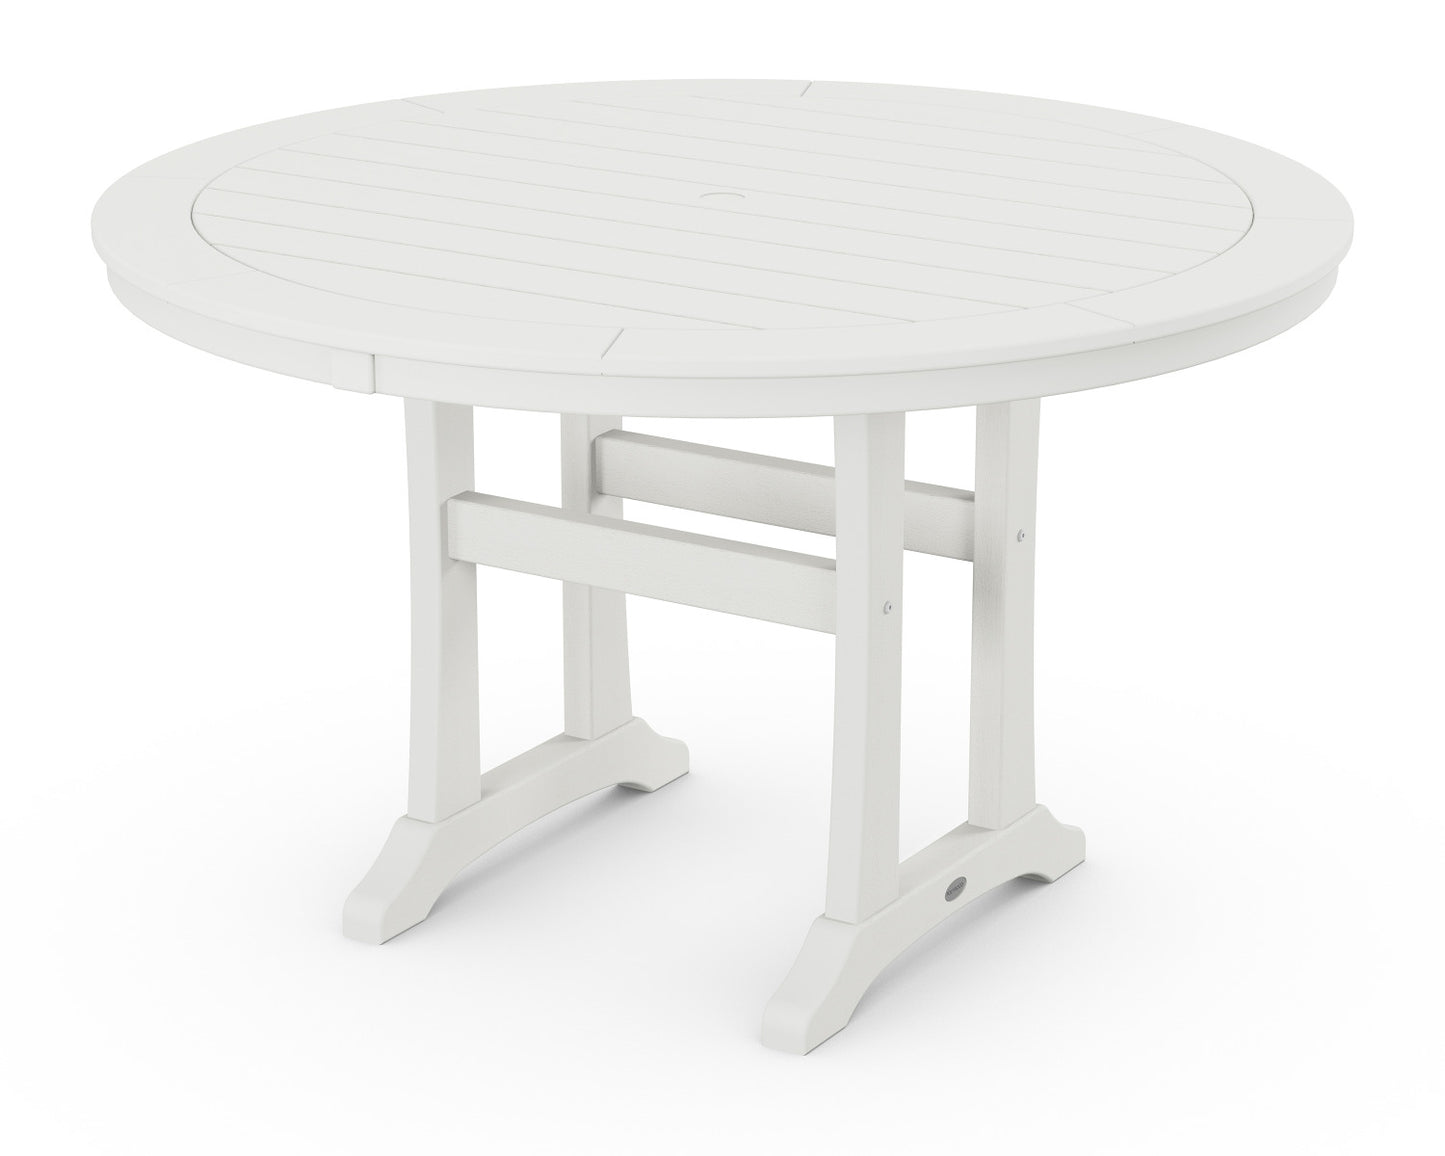 POLYWOOD Nautical Round 48" Dining Table